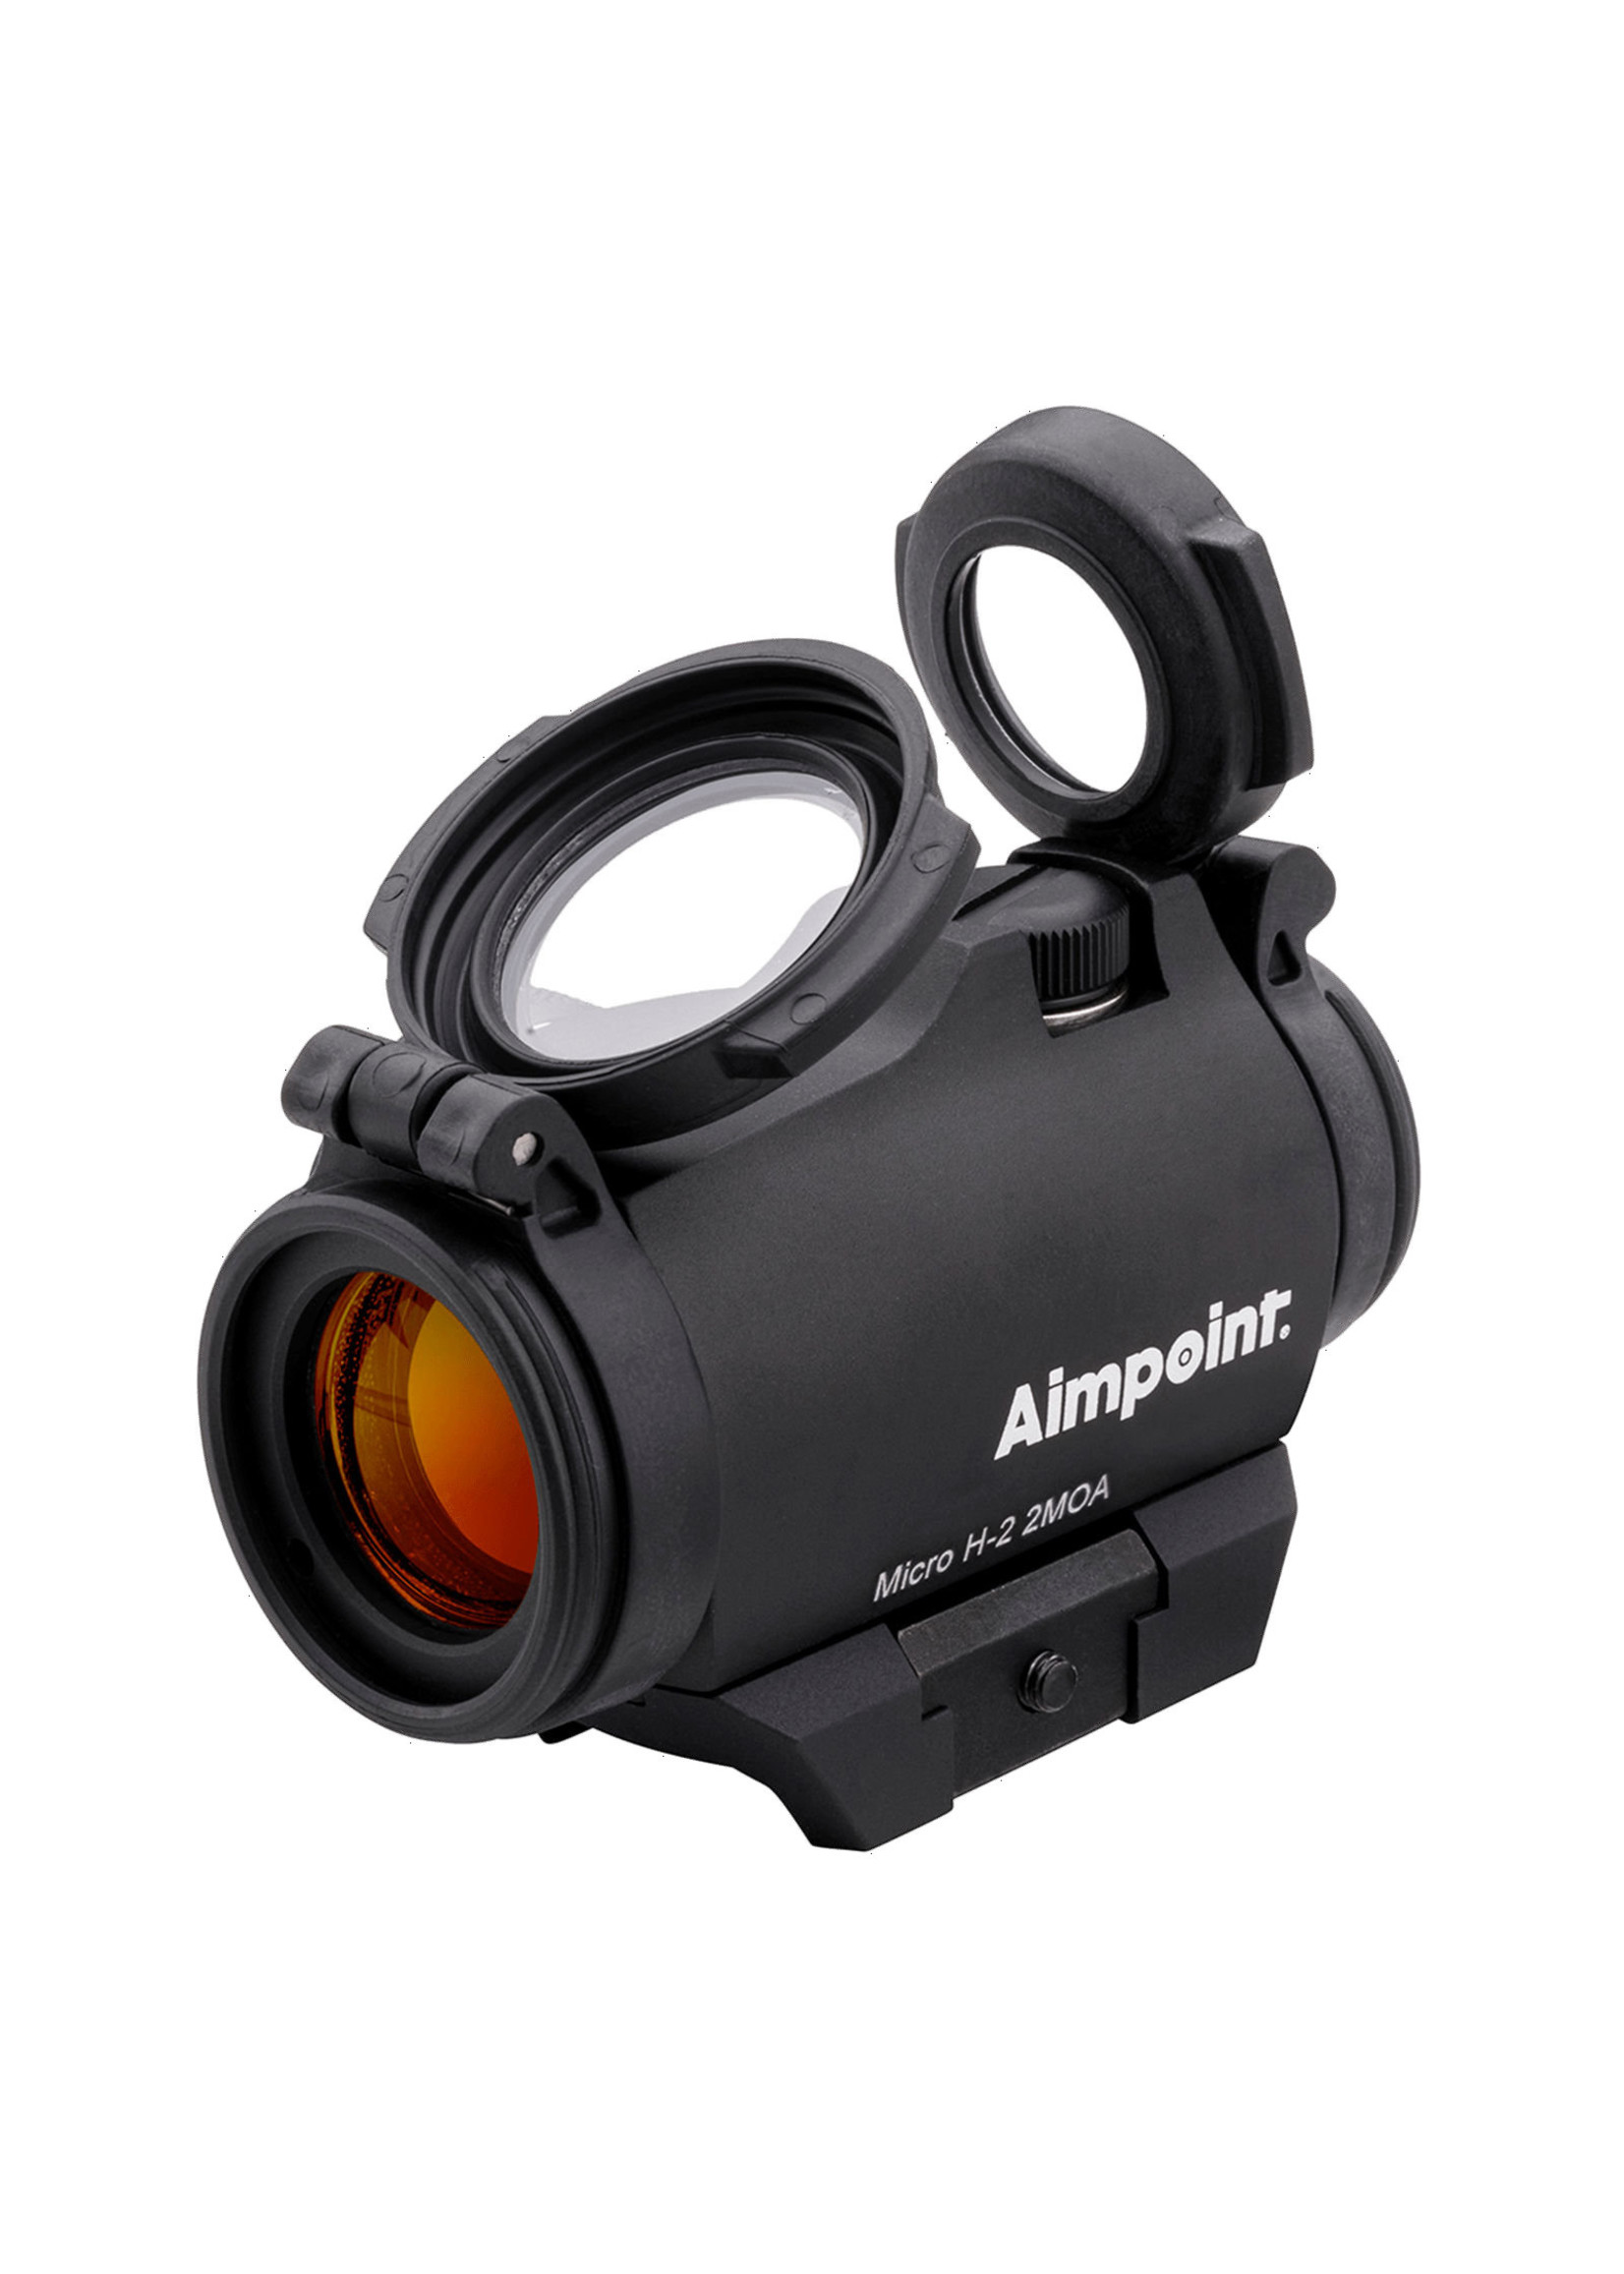 AIMPOINT MICRO H-2